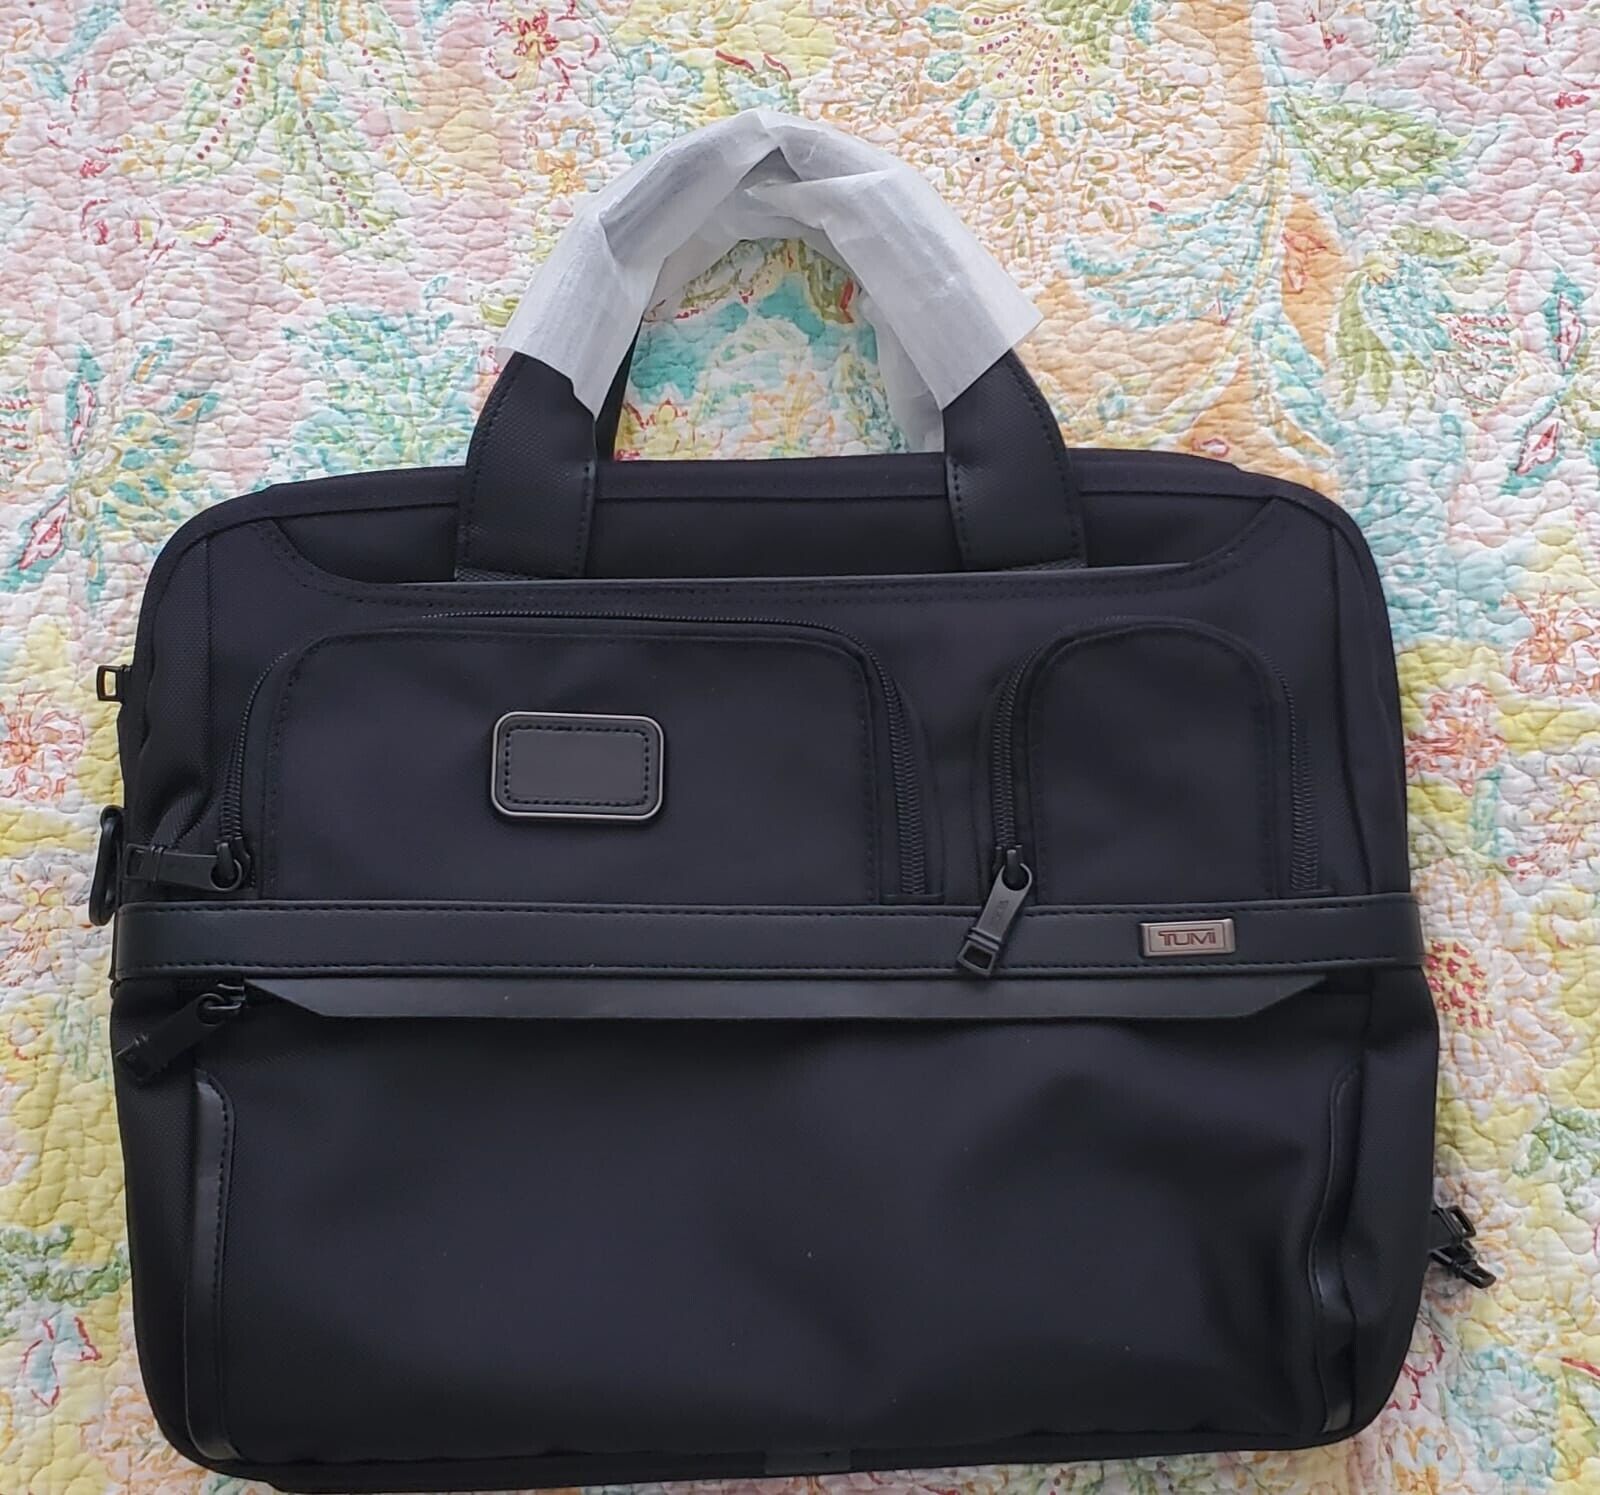 Tumi Alpha 3 Laptop bag Brief Black expandable organizer unwanted gift on sale